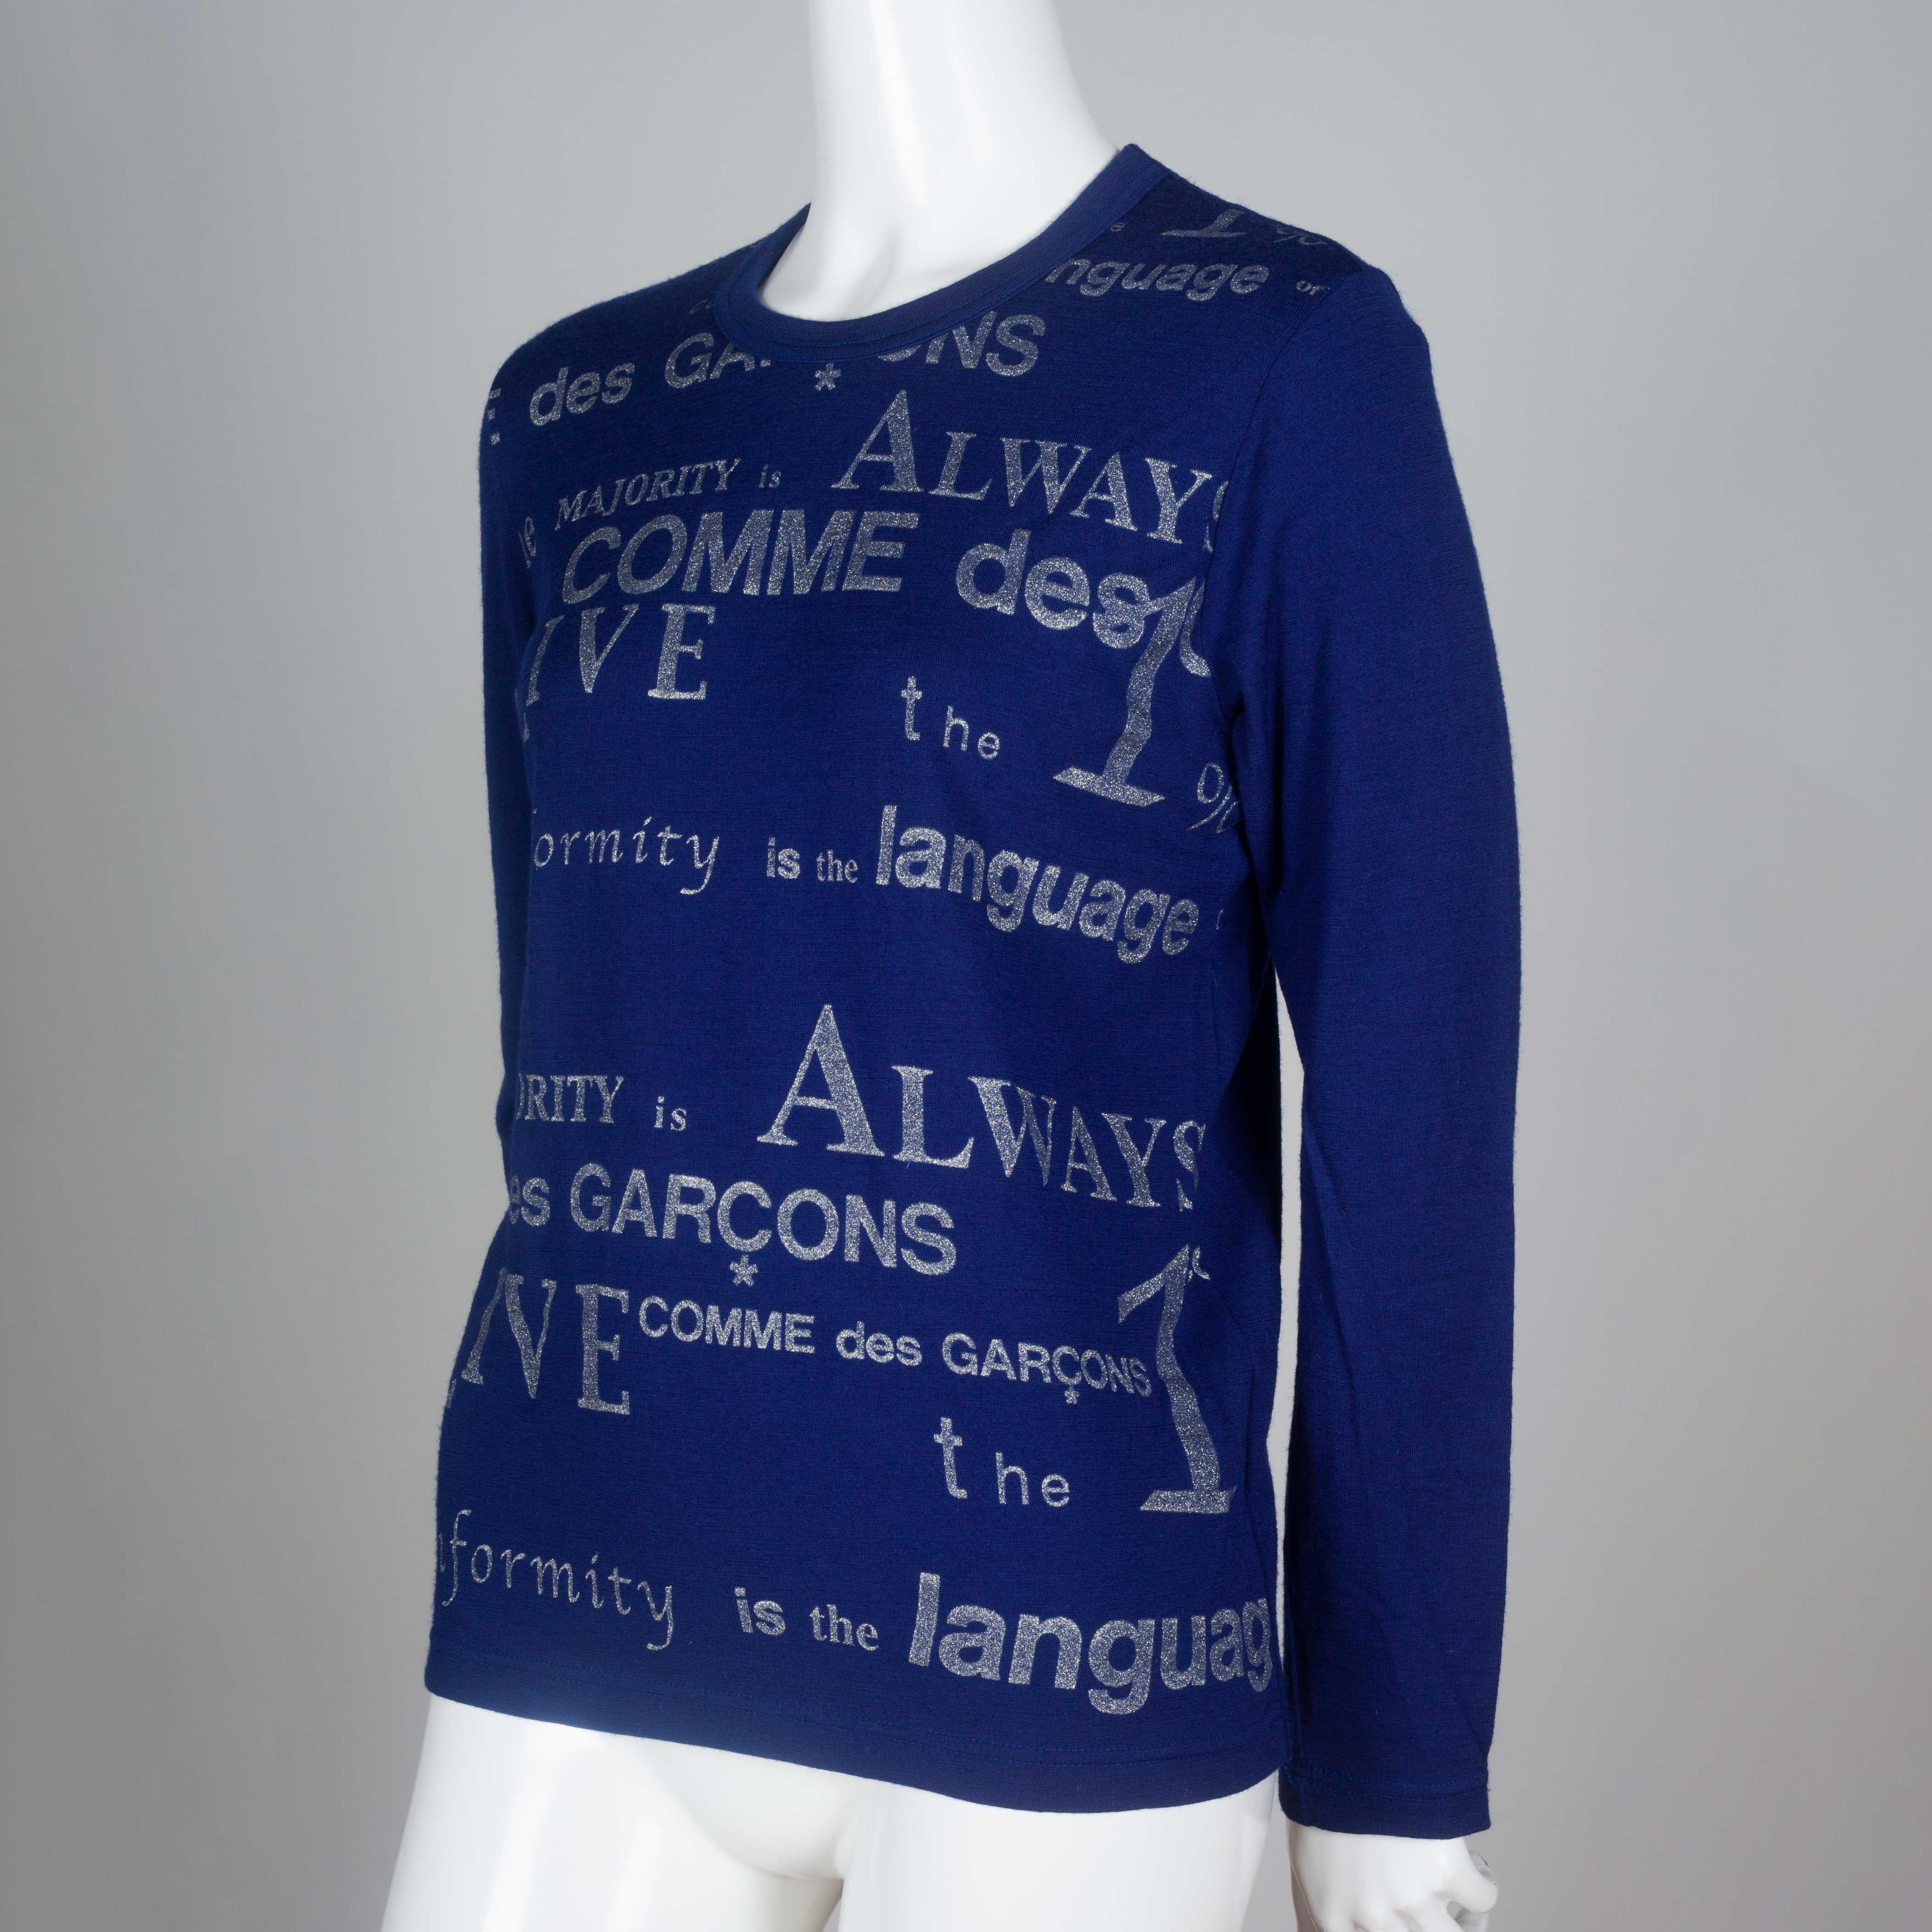 Comme des Garçons 2003 long sleeve wool shirt from Japan in blue with silver screen printed words.

YEAR: 2003
MARKED SIZE: No size marked
US WOMEN'S: S
US MEN'S: XS
FIT: Regular
CHEST: 17